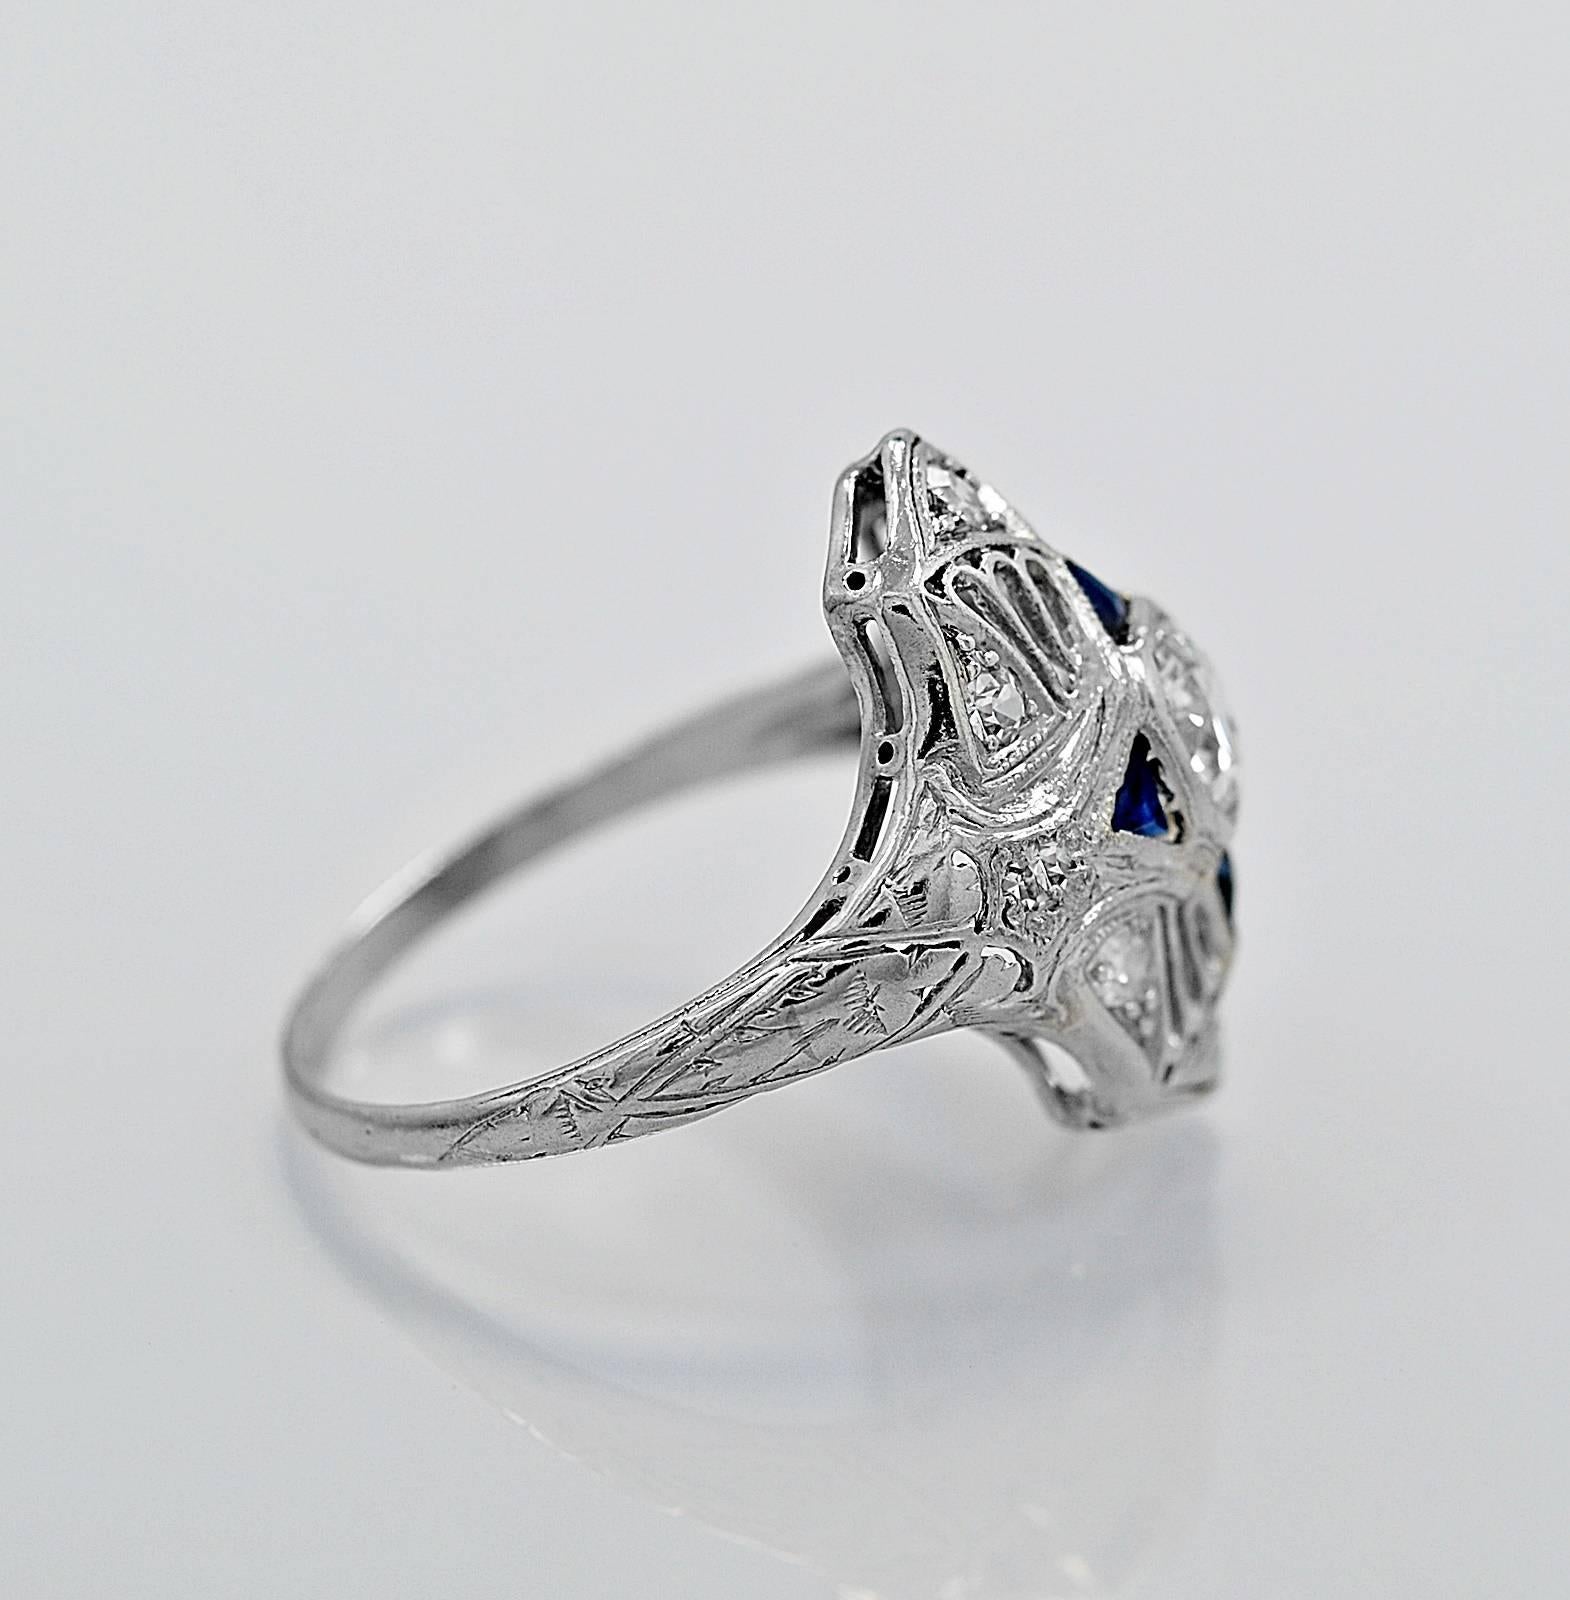 A wonderfully pierced, milgrain and engraved diamond, sapphire & platinum antique engagement ring or fashion ring from the Art Deco time period. It features a .40ct. apx. European cut diamond with G-H color and I1 clarity. Accented with .25ct. T.W.